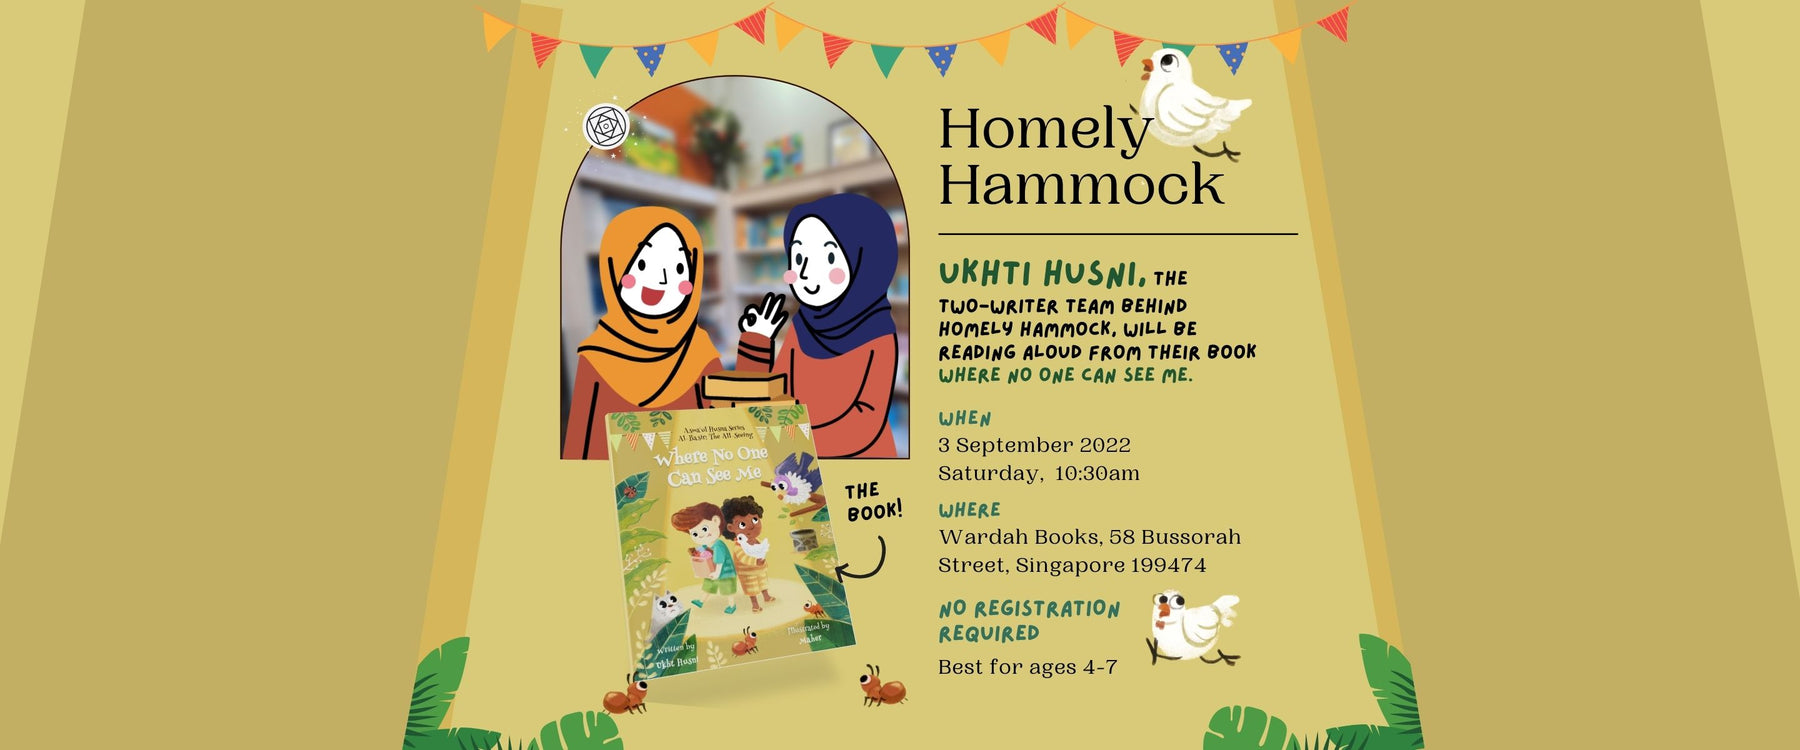 Read-Aloud Session with Homely Hammock